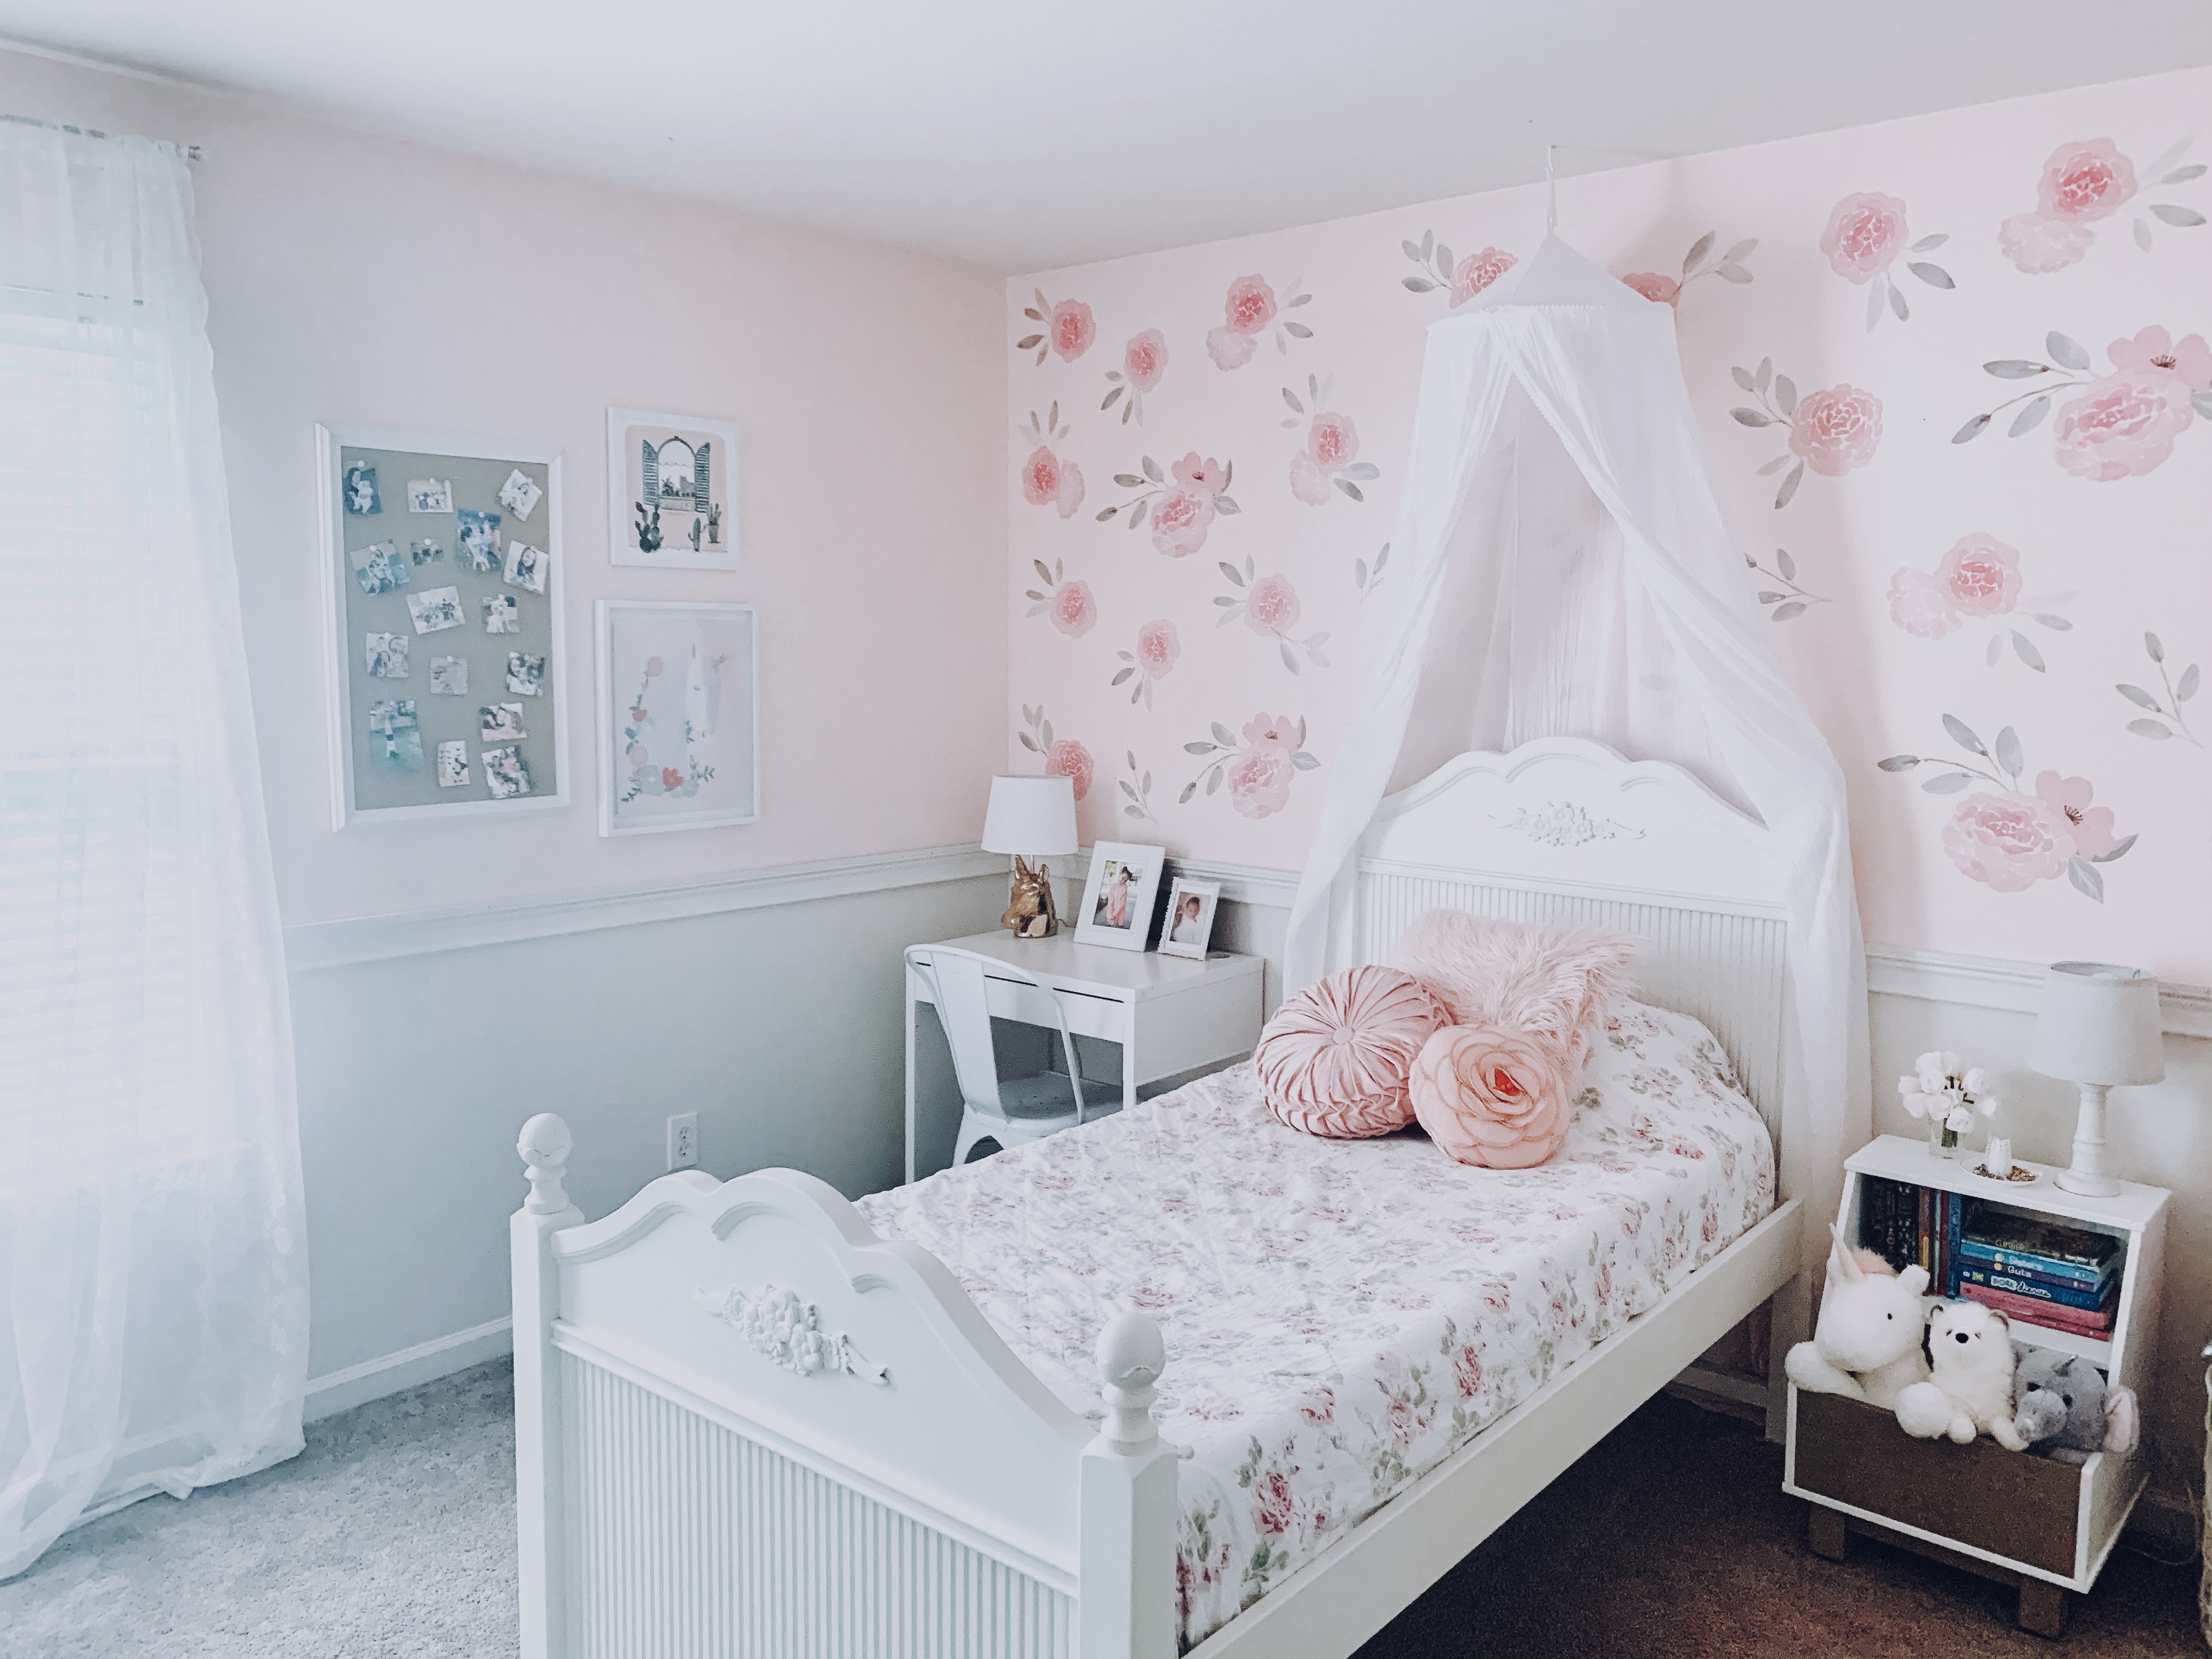 Room Tour: Sienna’s Pink Room with Floral Decals – At Home With Natalie